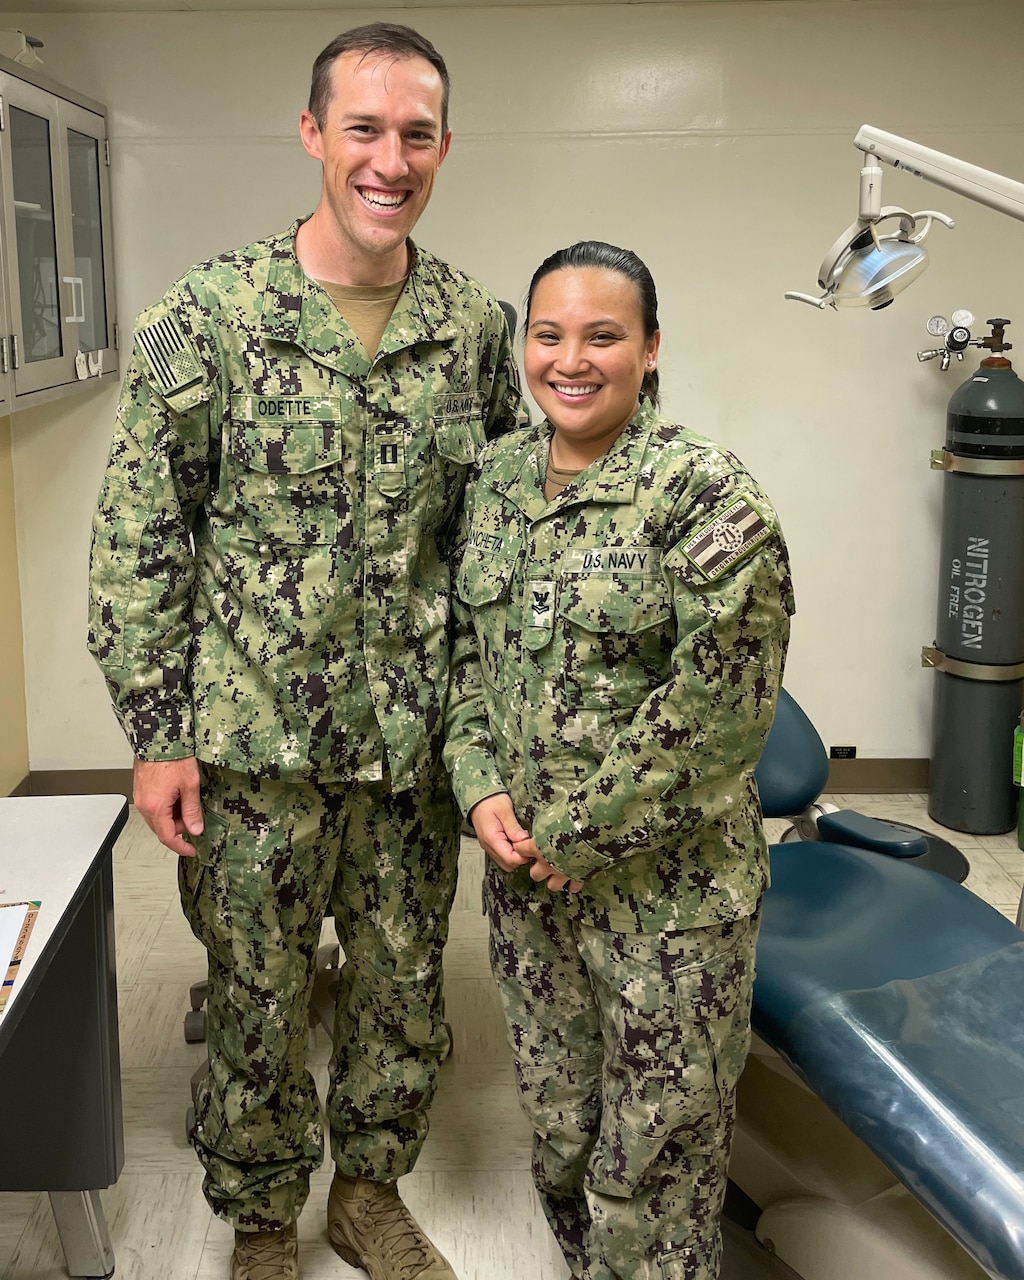 Navy Lt. Justin Odette, left, and Logistics Specialist 2nd Class Dianne Ancheta pose aboard USS Theodore Roosevelt (CVN 71) after delivery of her 3D printed dental prosthetics, July 28, 2022. (Courtesy photo/ U.S. Navy)